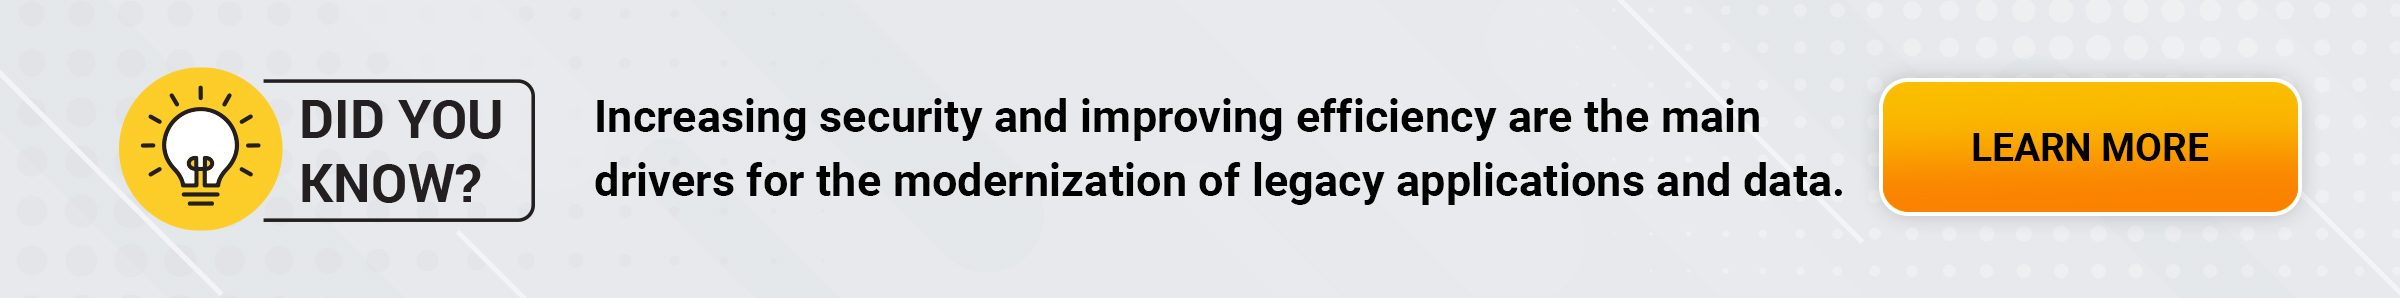 Increasing security and improving efficiency are the main drivers for the modernization of legacy applications and data. 